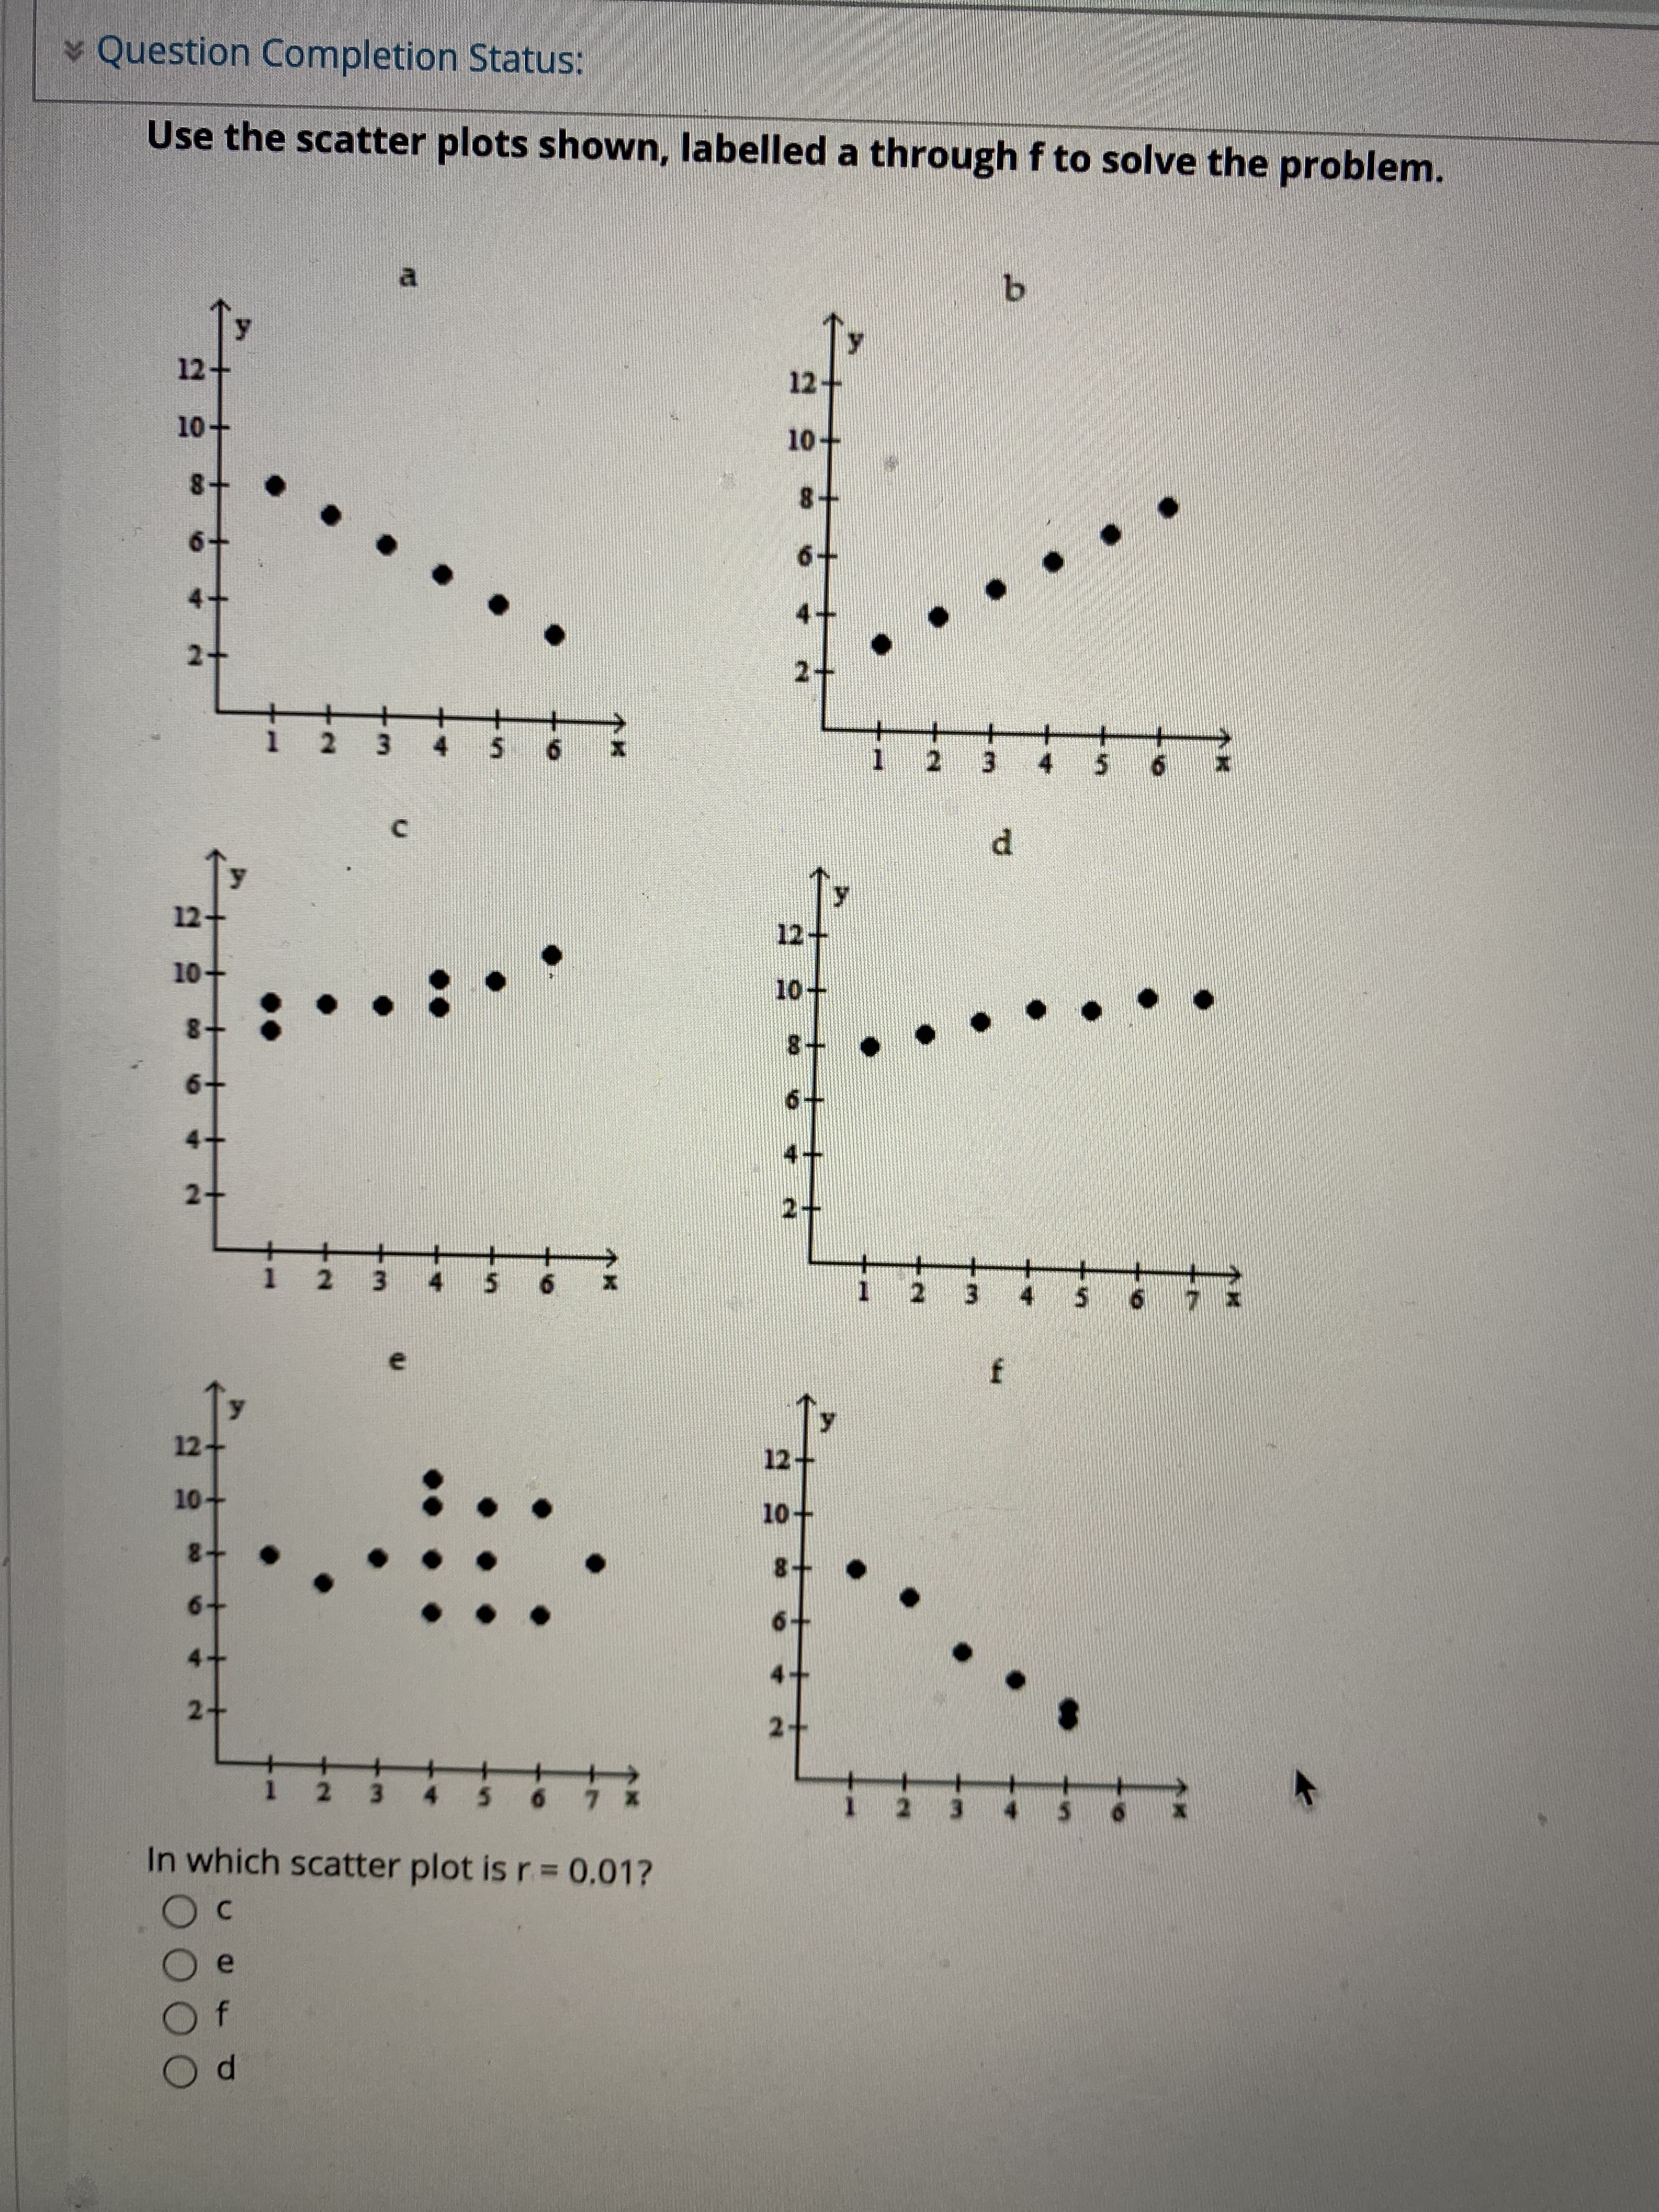 In which scatter plot is r= 0.01?
C
e
d.
